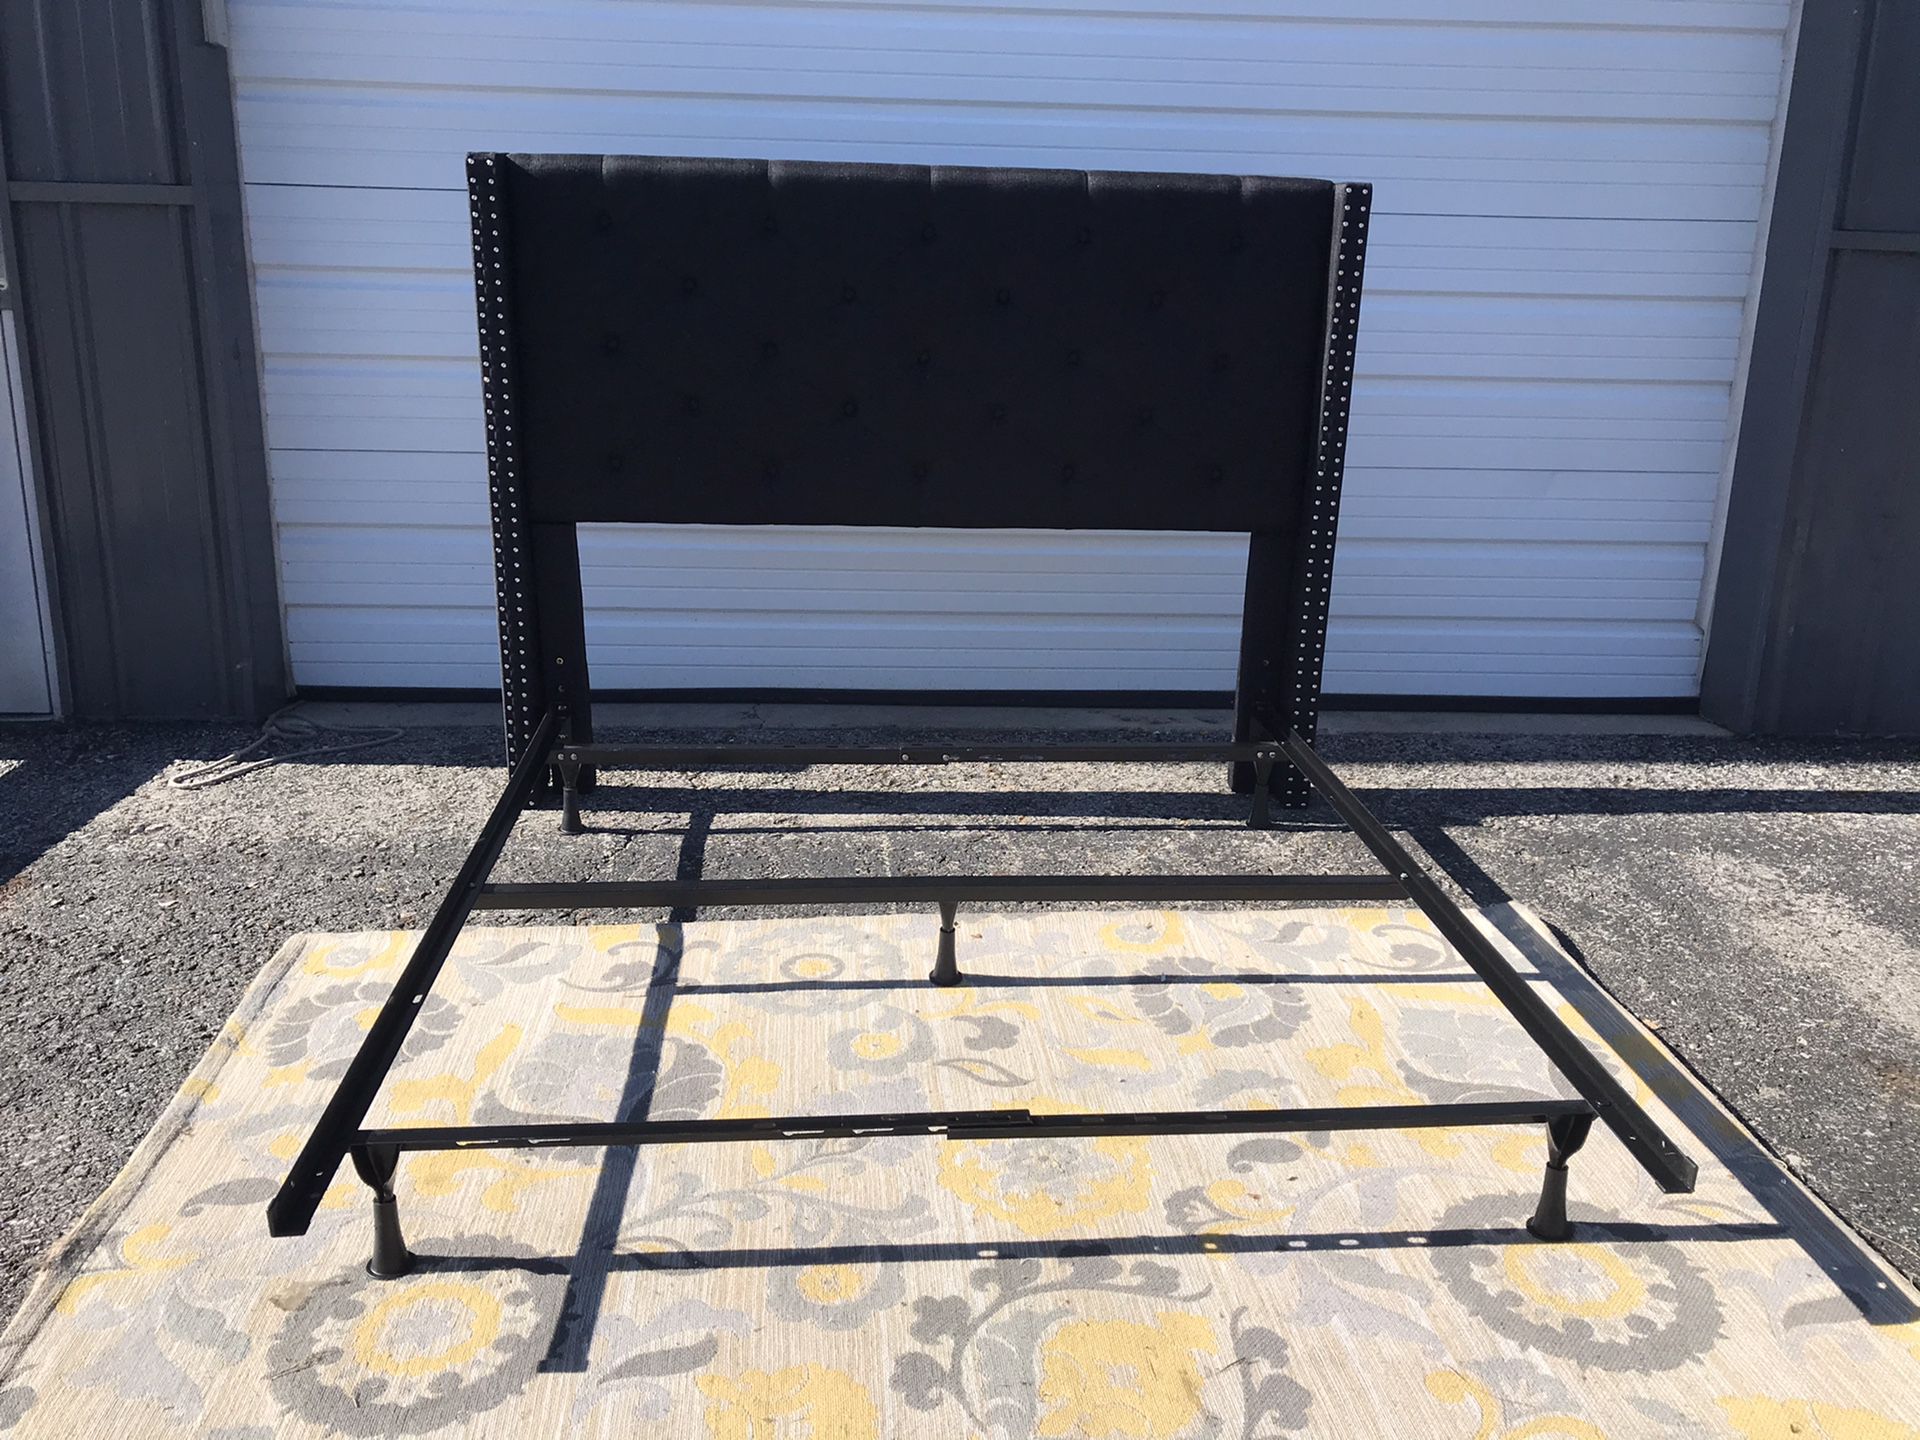 New QUEEN size metal bed frame and tufted headboard